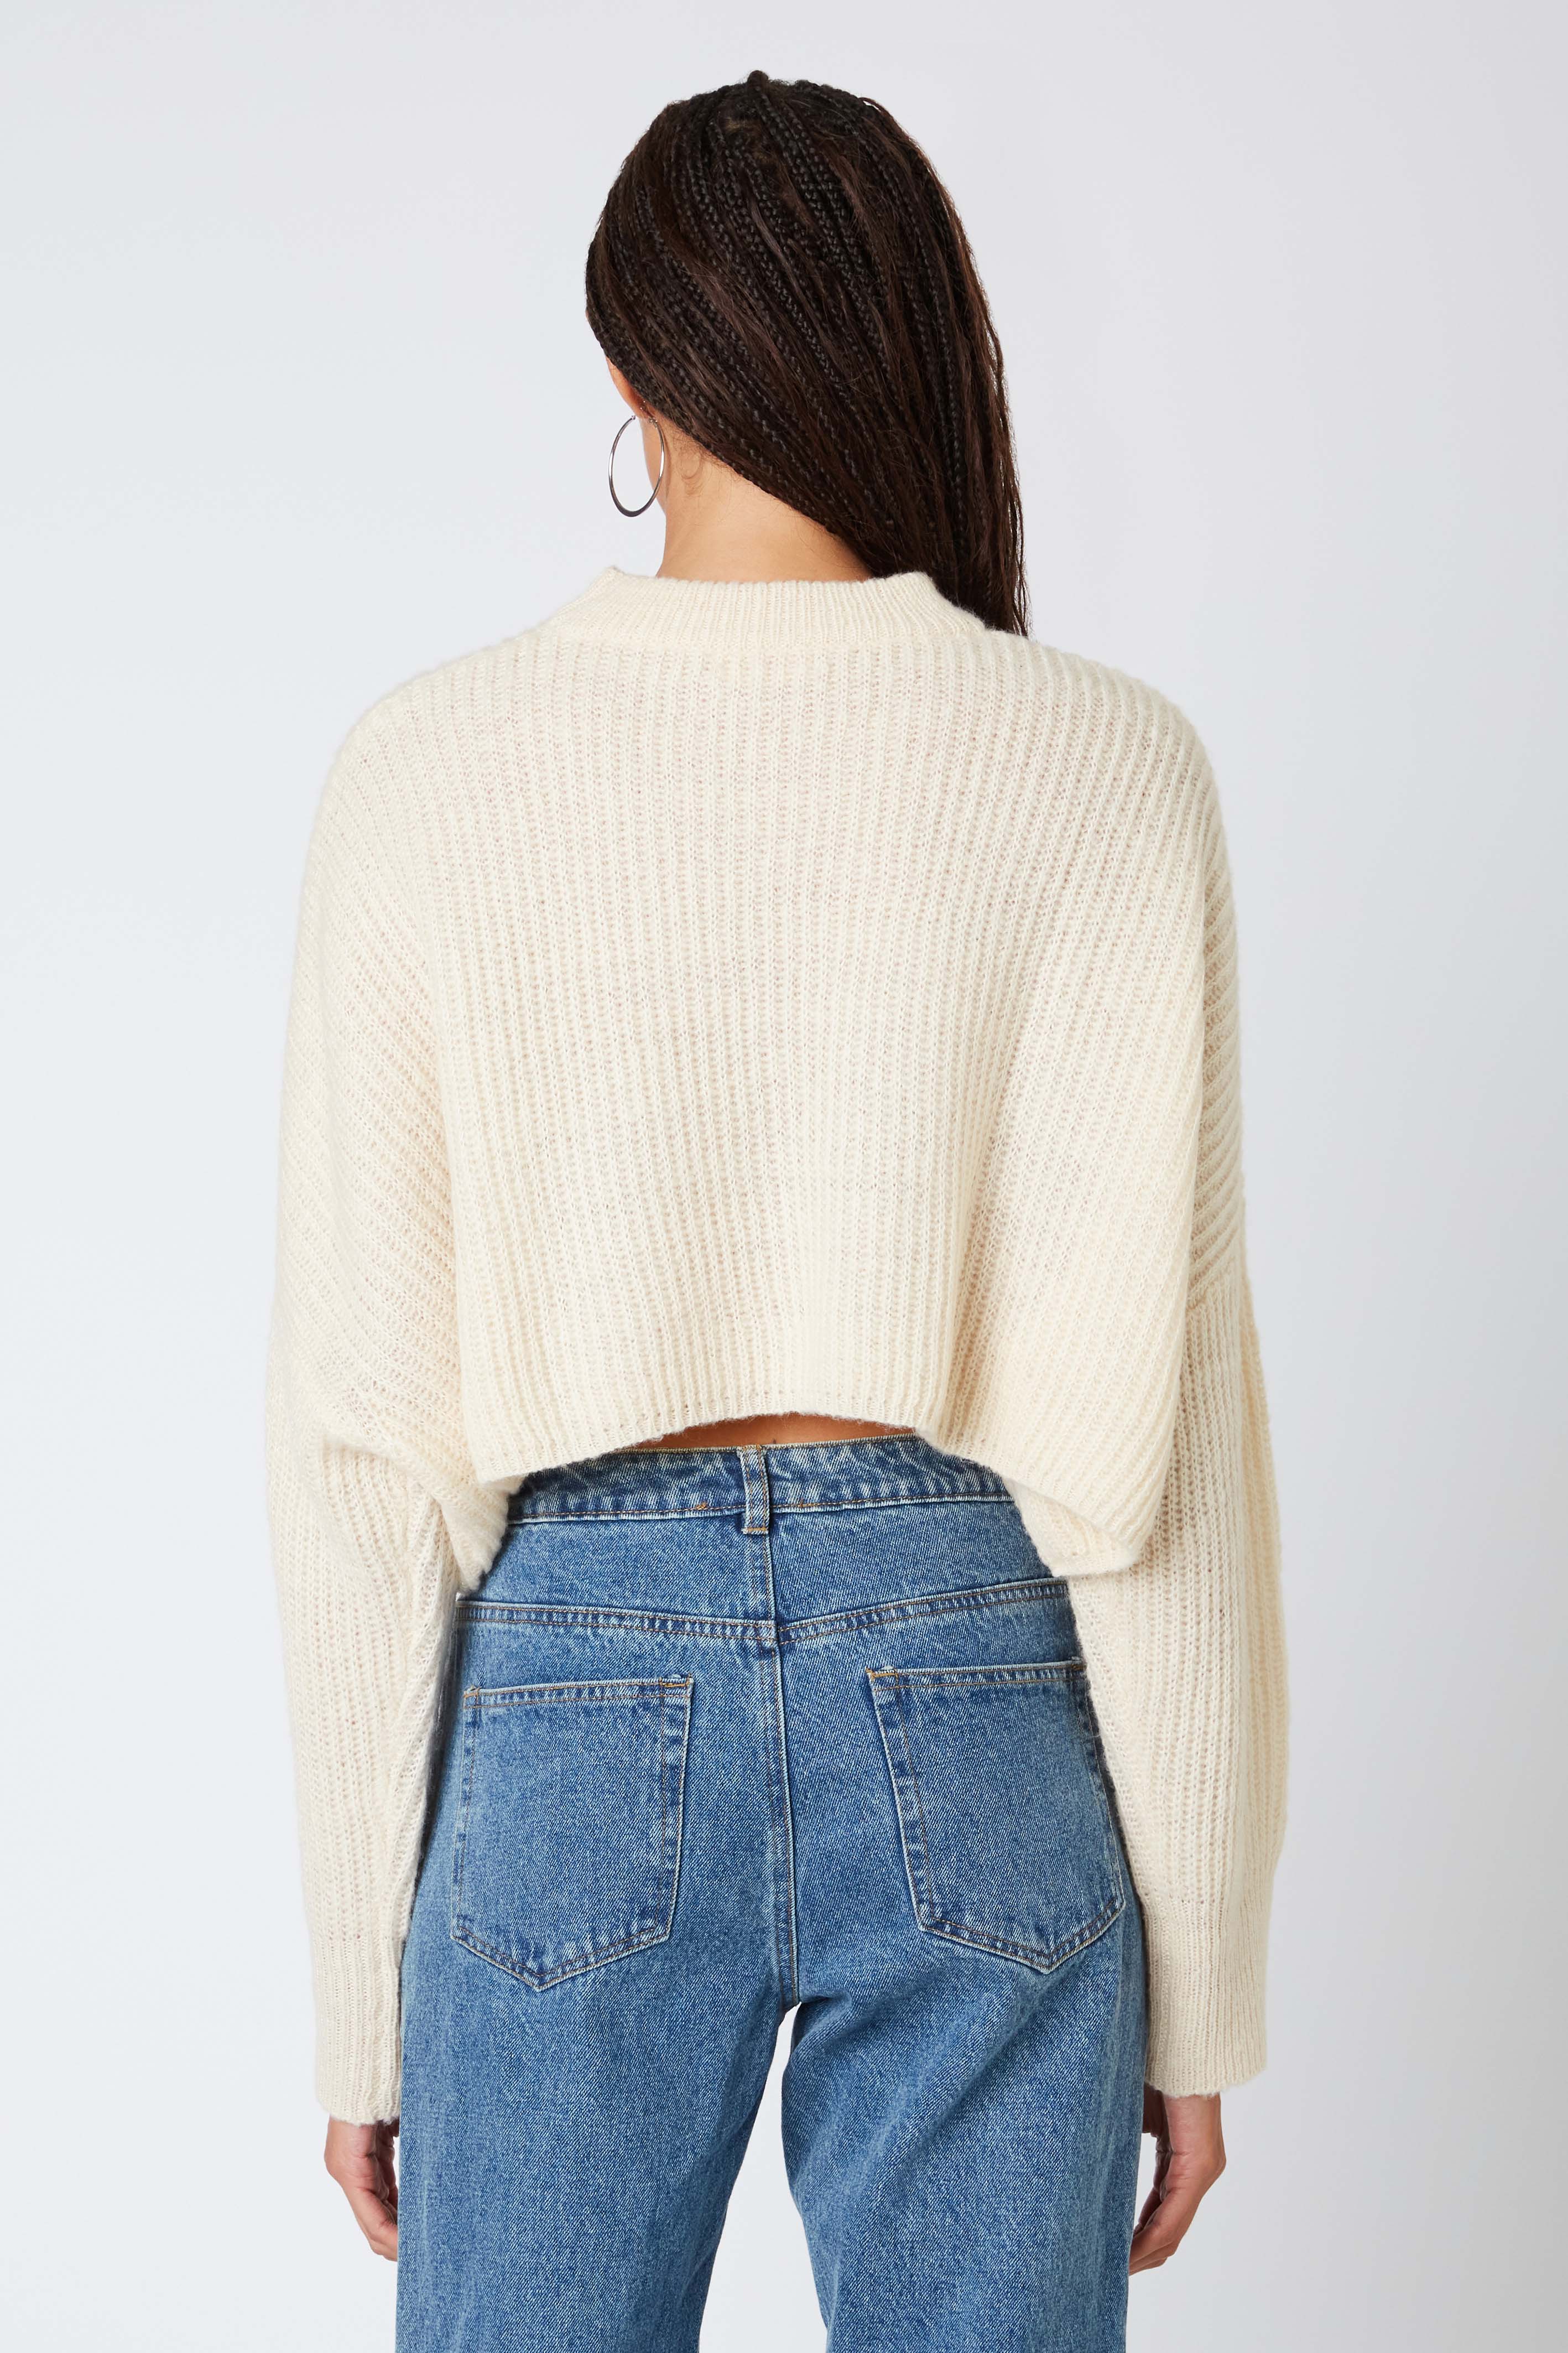 Cropped Mockneck Sweater in Ivory Back View